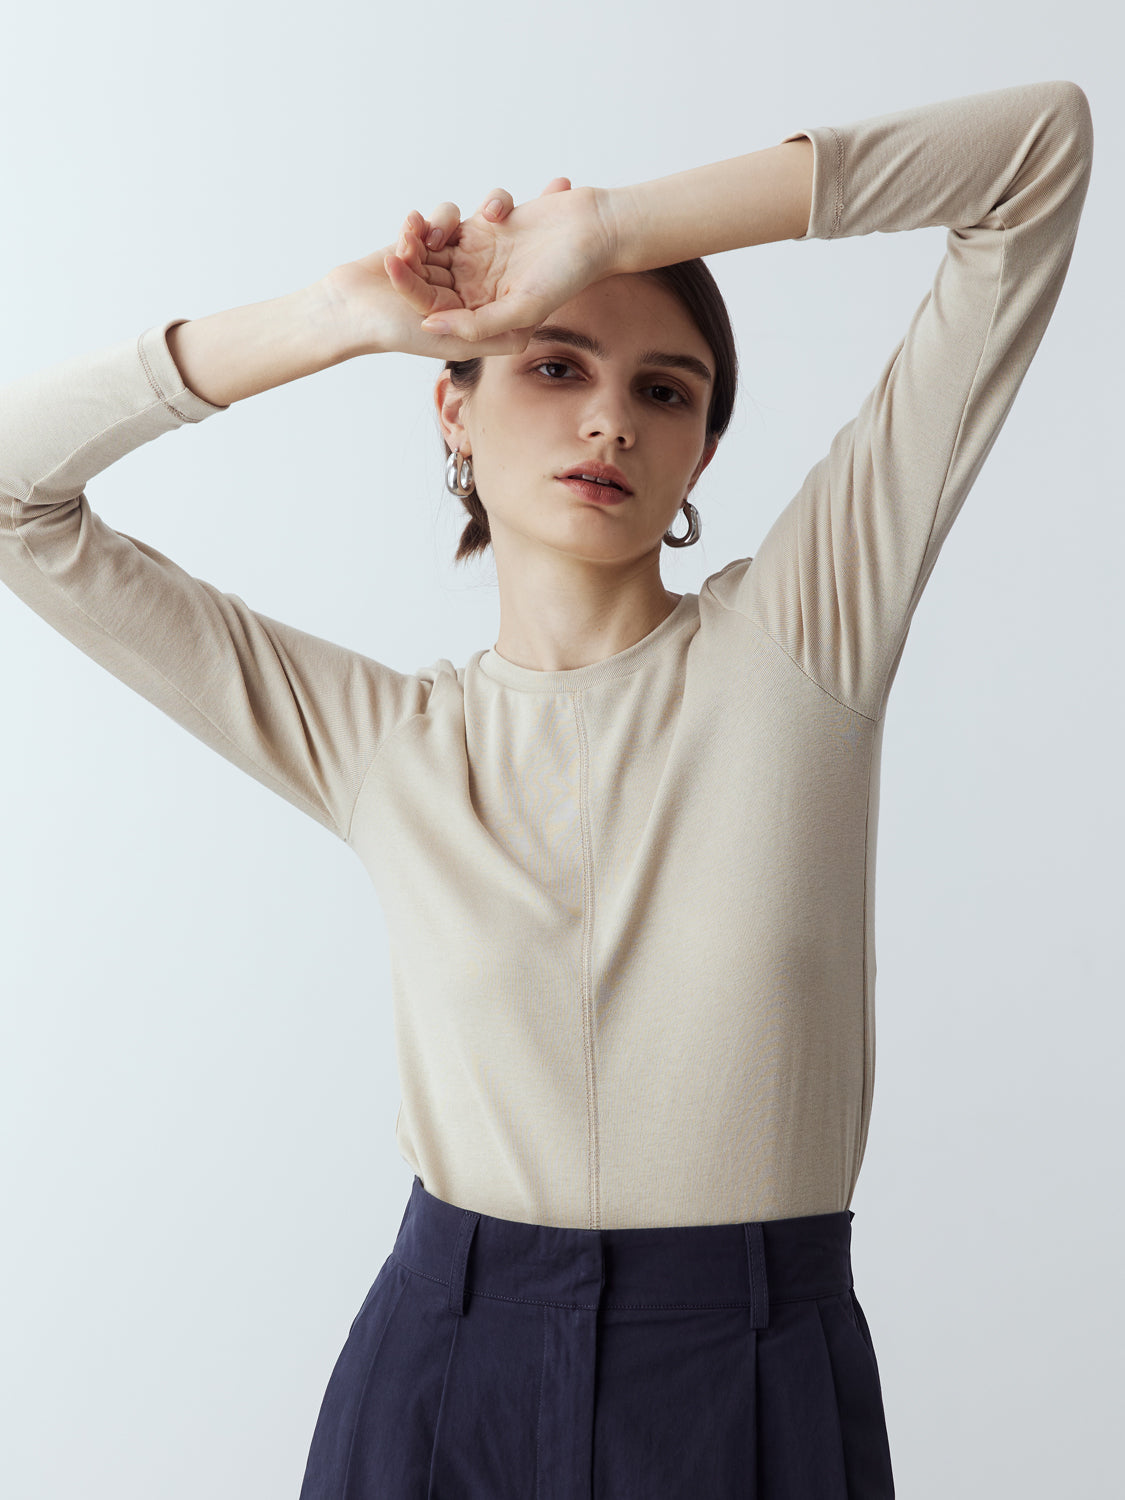 sand : Model is wearing the Fitted Long Sleeve T-Shirt in Sand, which comes with a rounded crew neckline and a centre front stitch line. Arm-hugging but gives a relaxed bodice. Worn with Cotton Tailored Trousers in Navy.